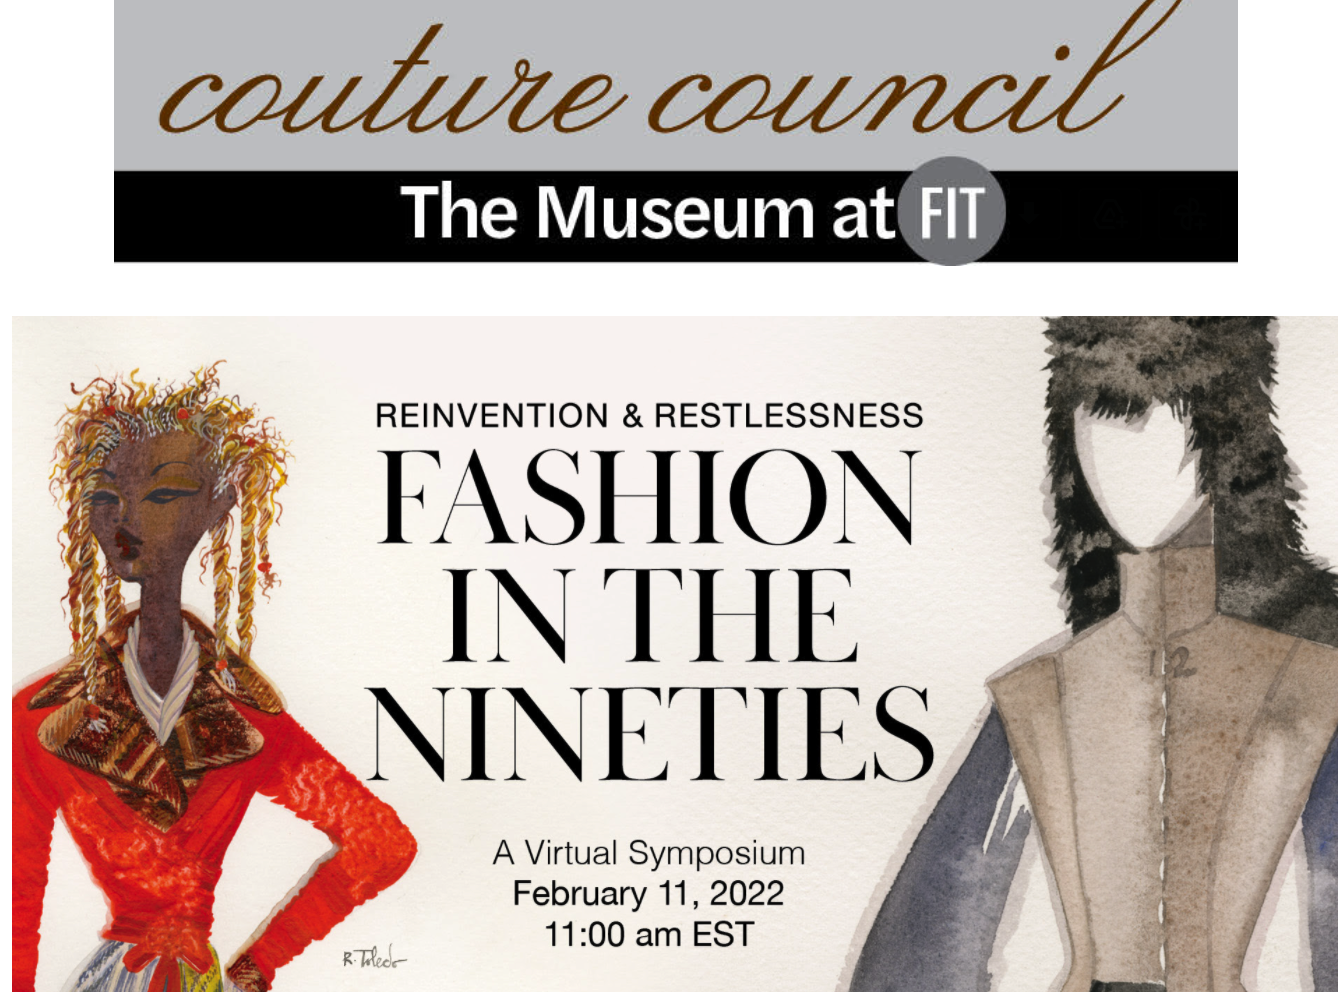 What2wearwhere Karen klopp Weekly Fave 5   The Museum at Fit couture council a virtual symphosium fashion in the nineties.